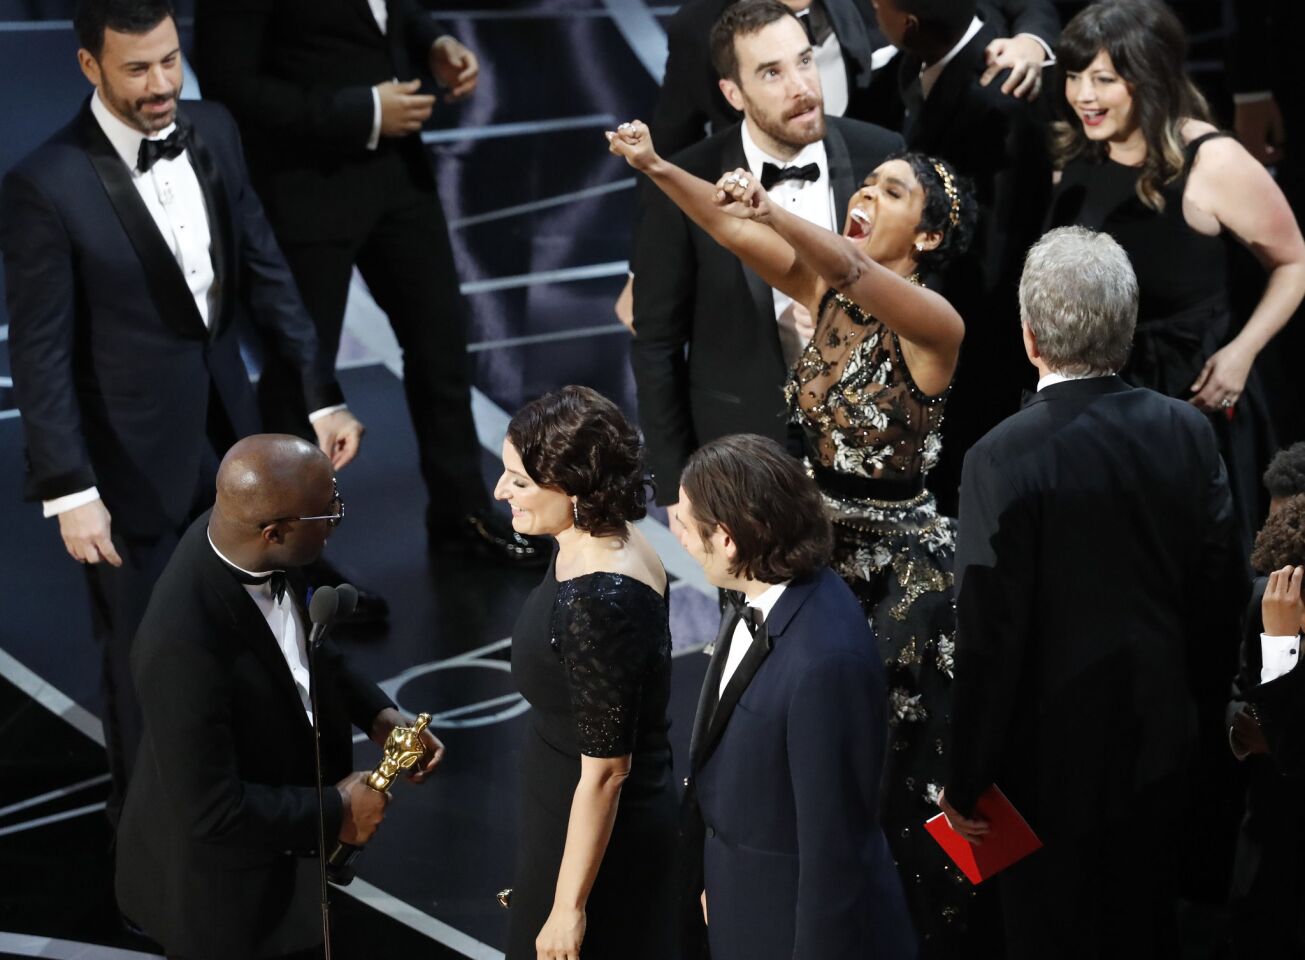 Janelle Monae reacts onstage after "Moonlight" won for best picture during the Academy Awards telecast on Feb. 26.